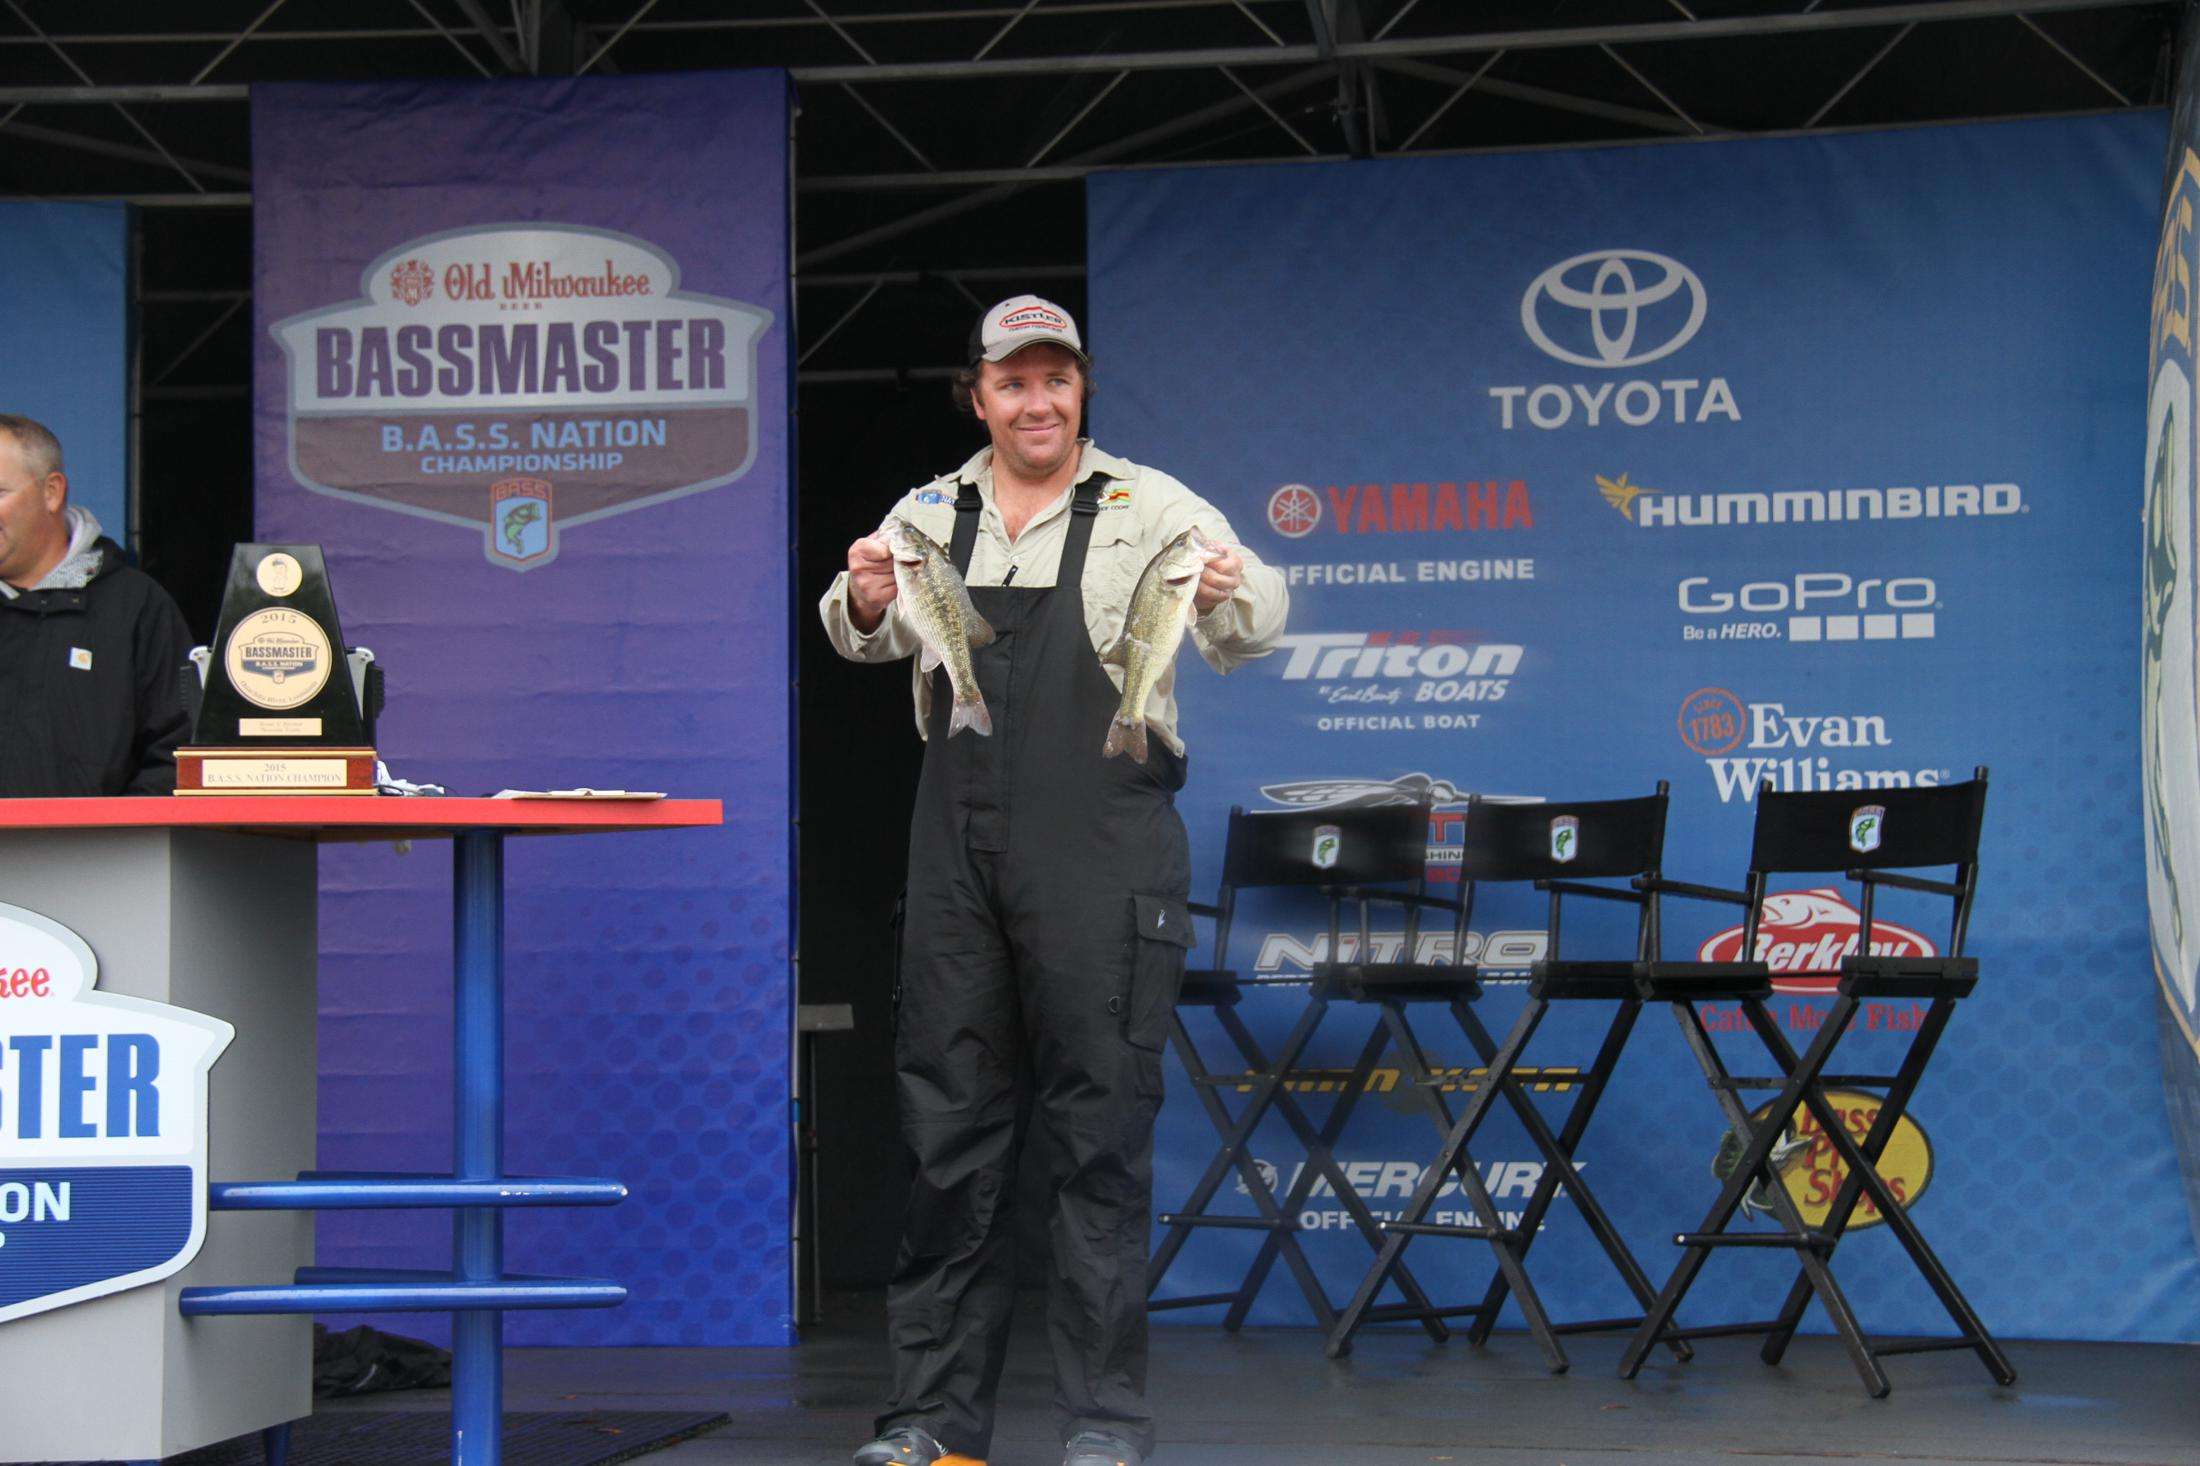 Bruce Cooke, 19 pounds, 38th place